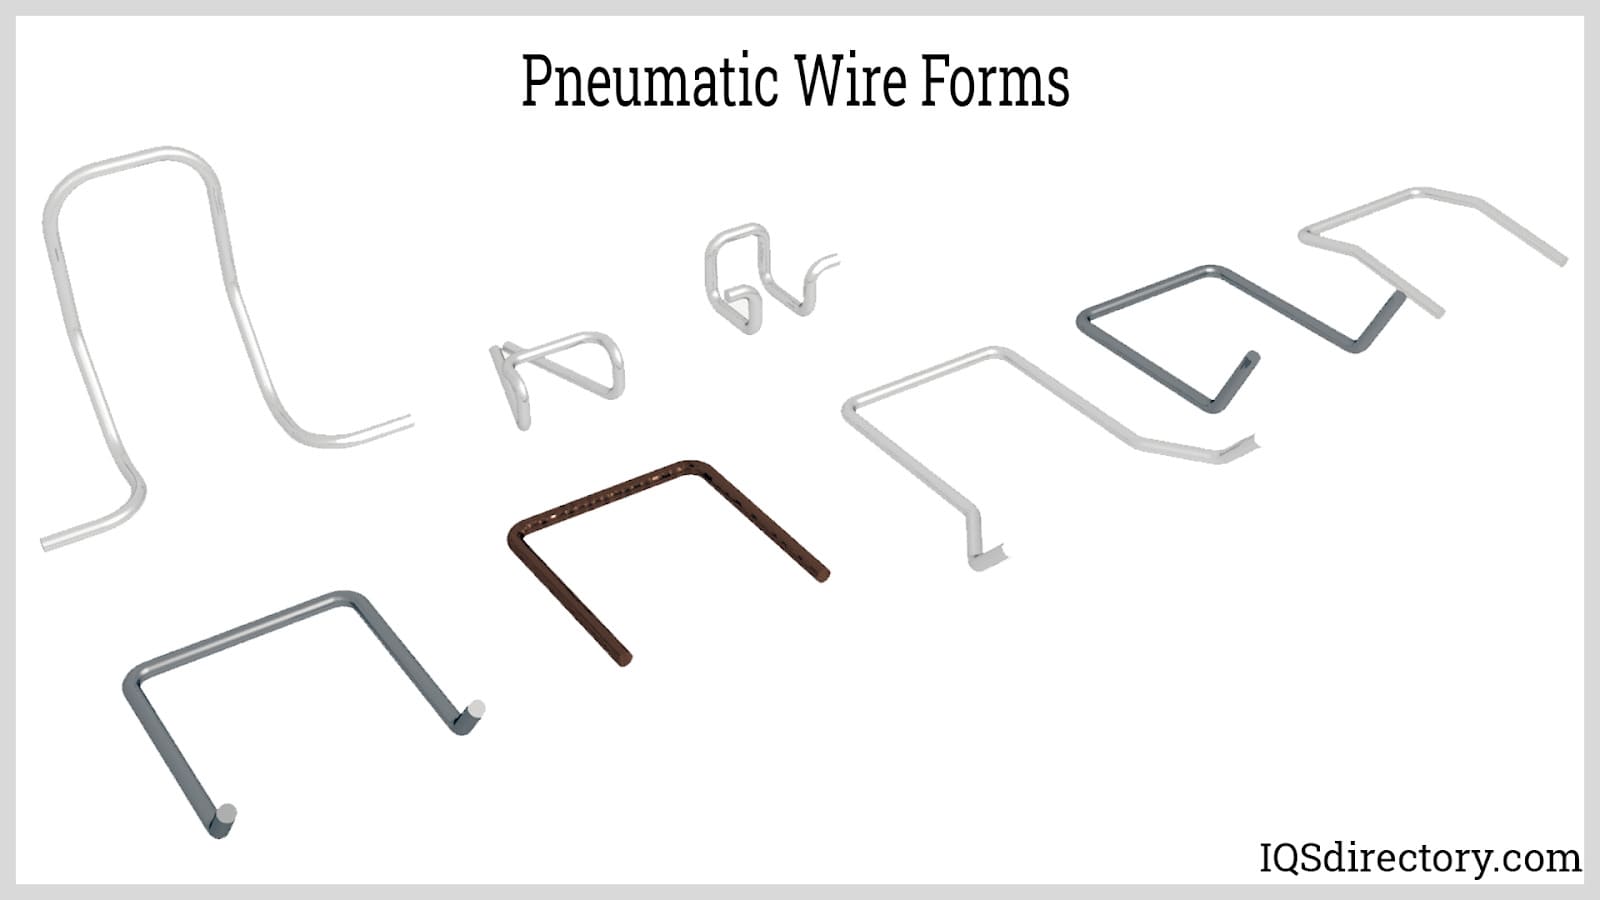 Pneumatic Wire Forms